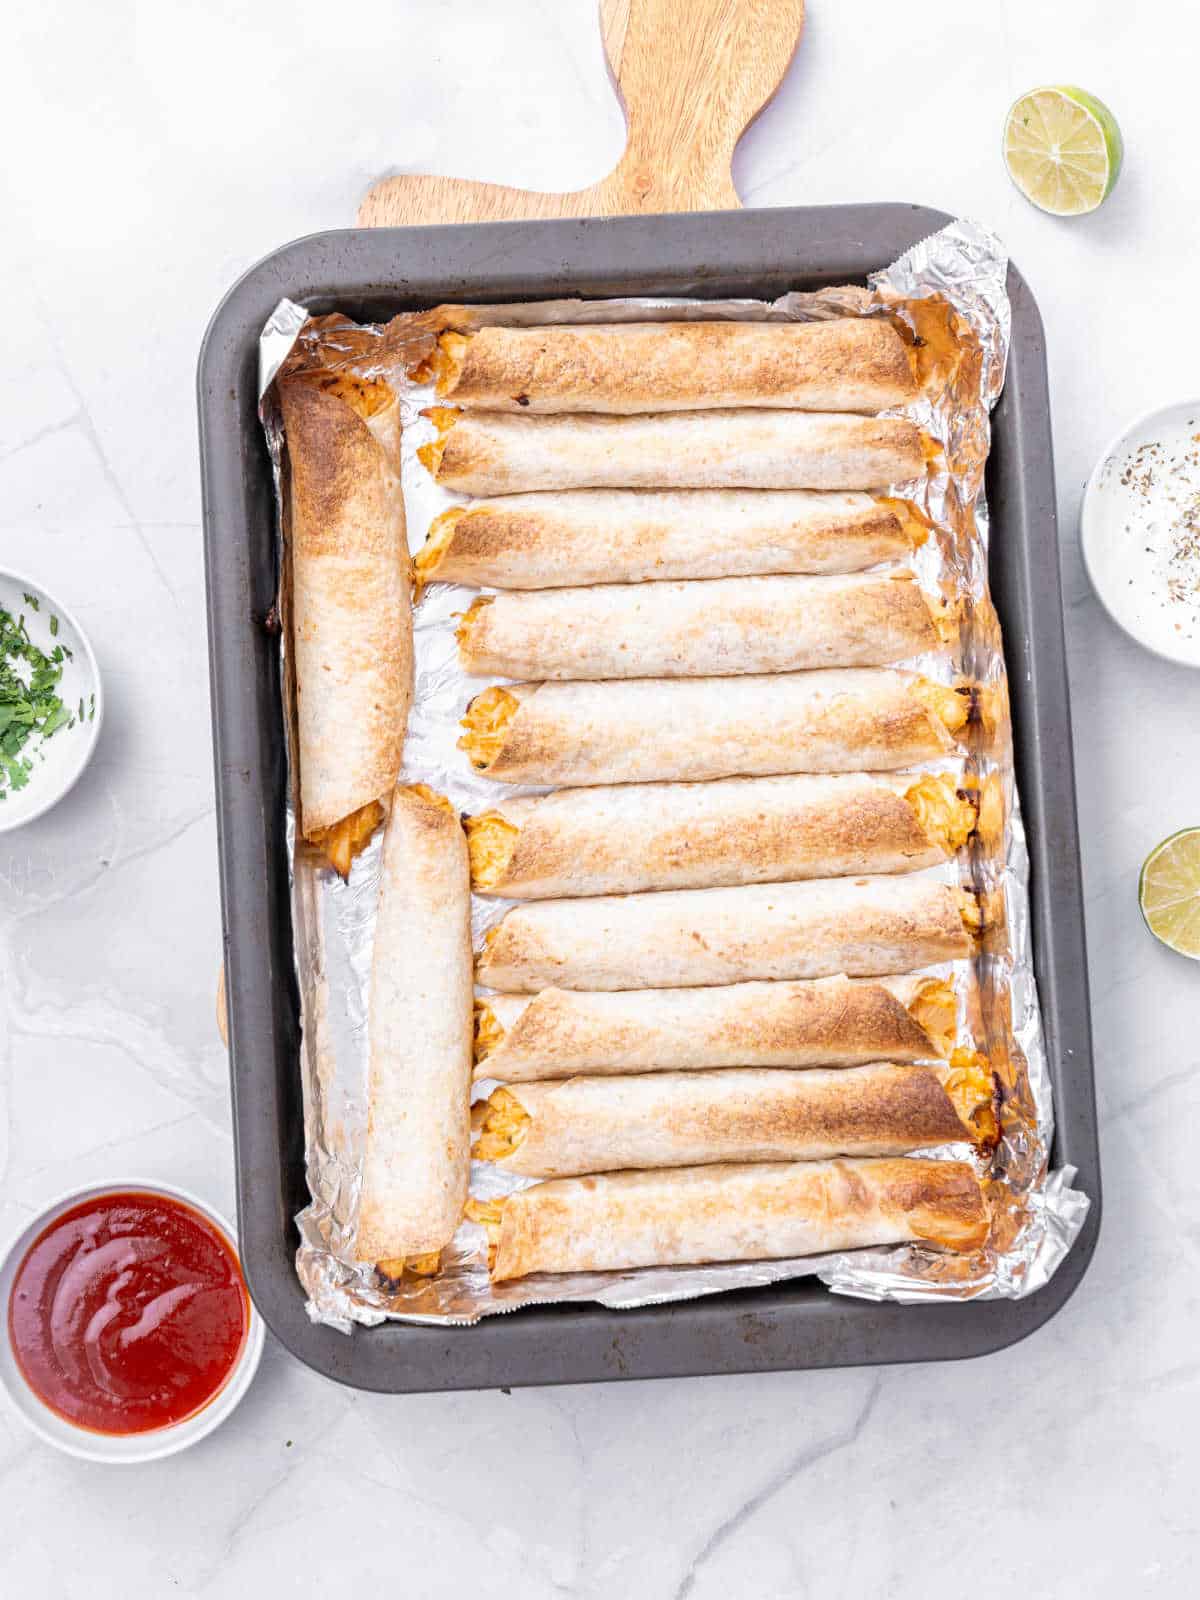 Oven tray with baked taquitos. White marbled surface, bowls with garnishes.